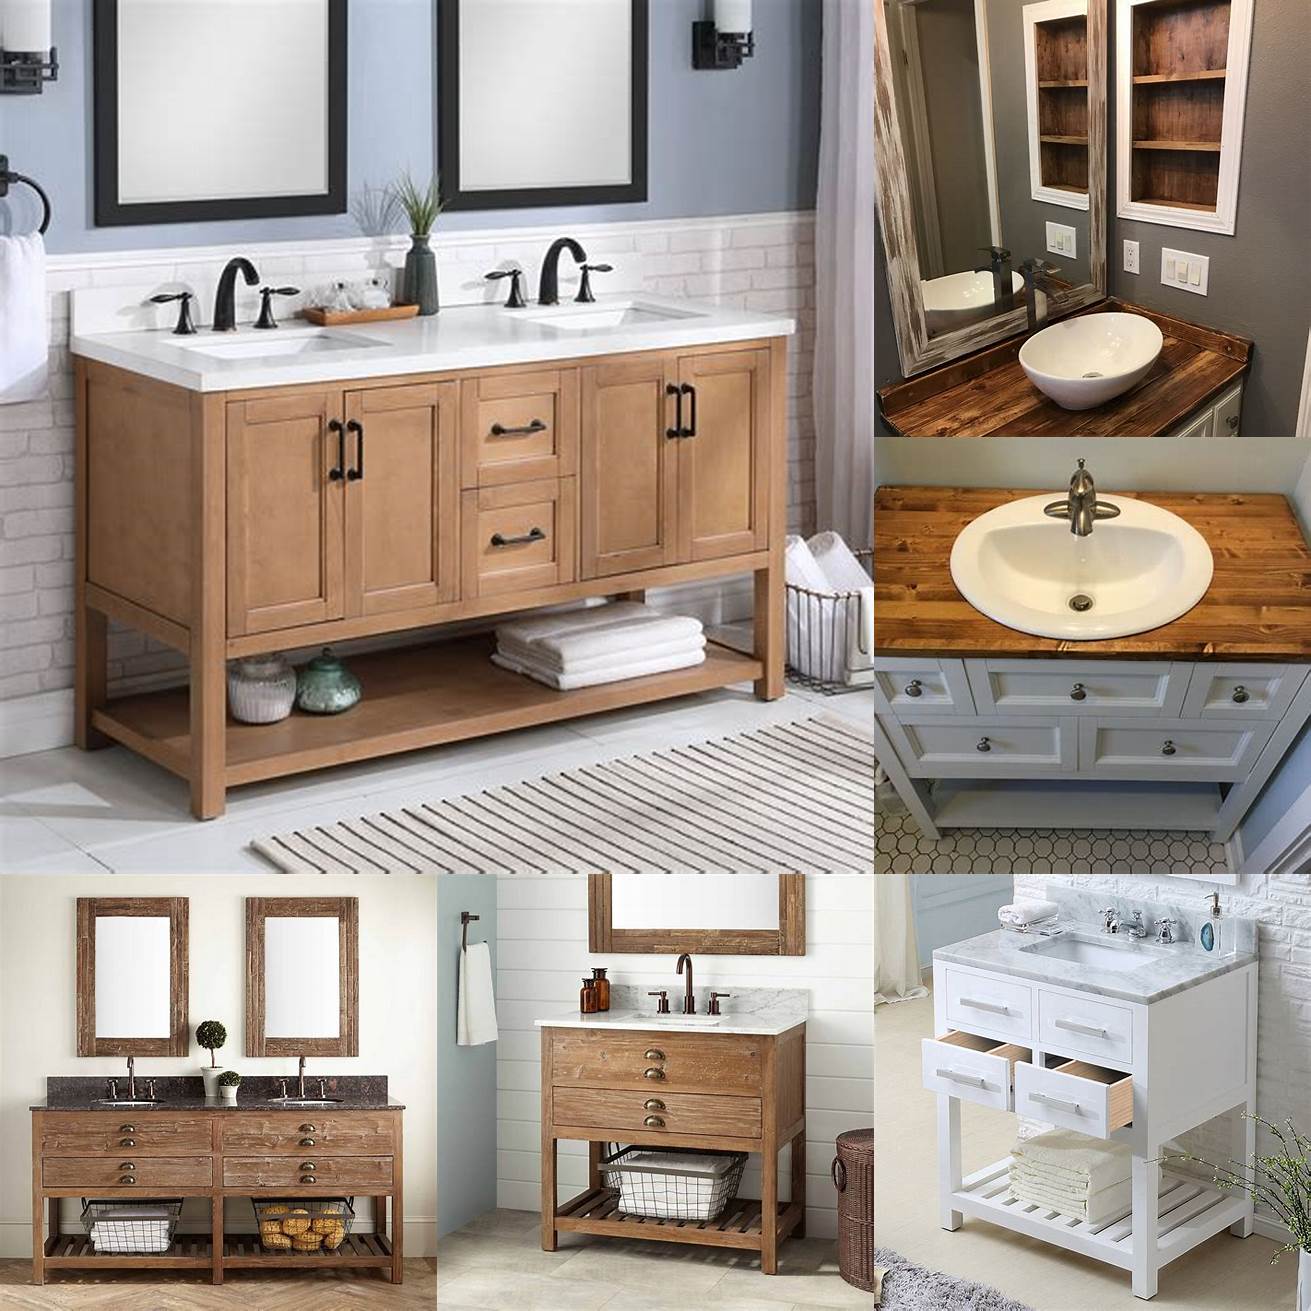 Image of a wood bathroom vanity top with a white rectangular sink